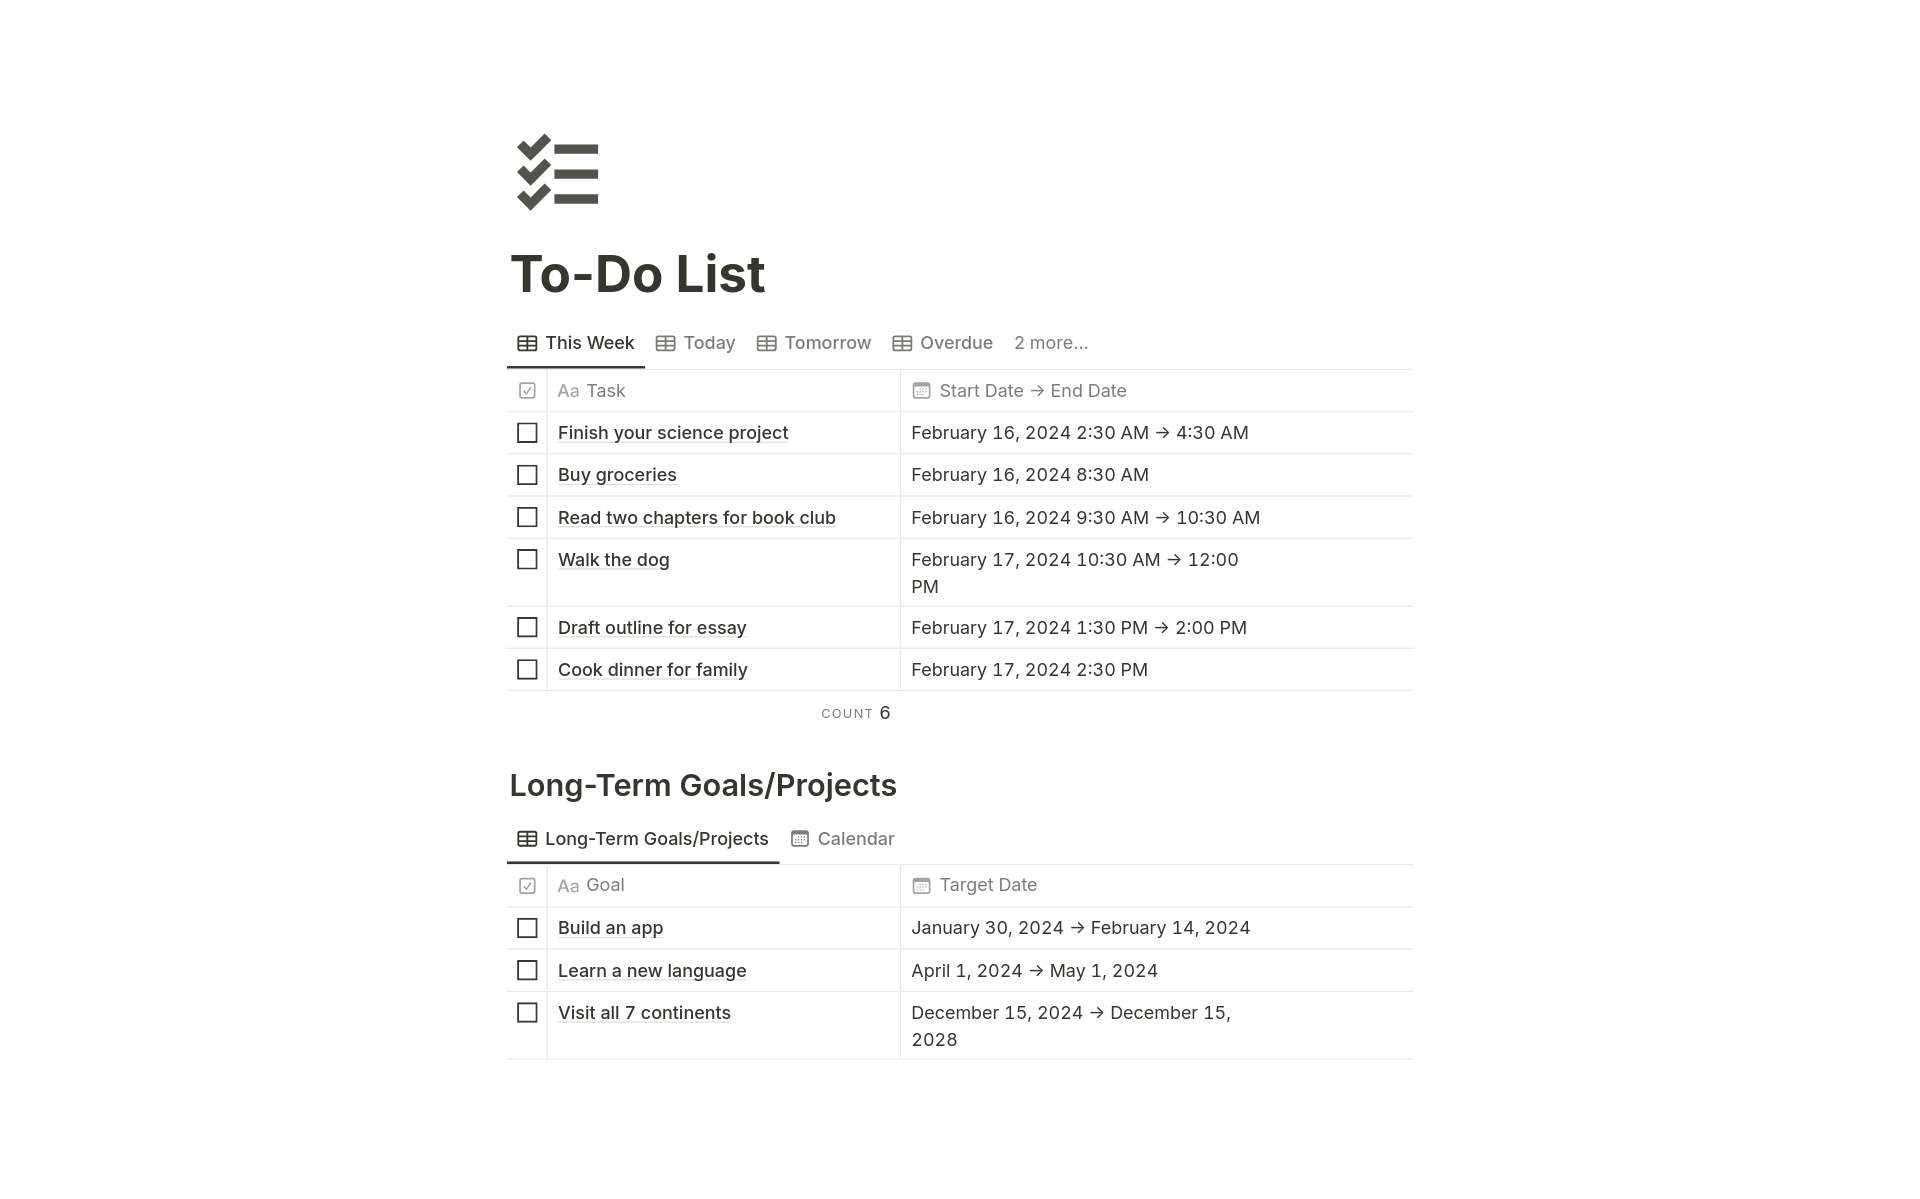 Organize and complete your tasks.